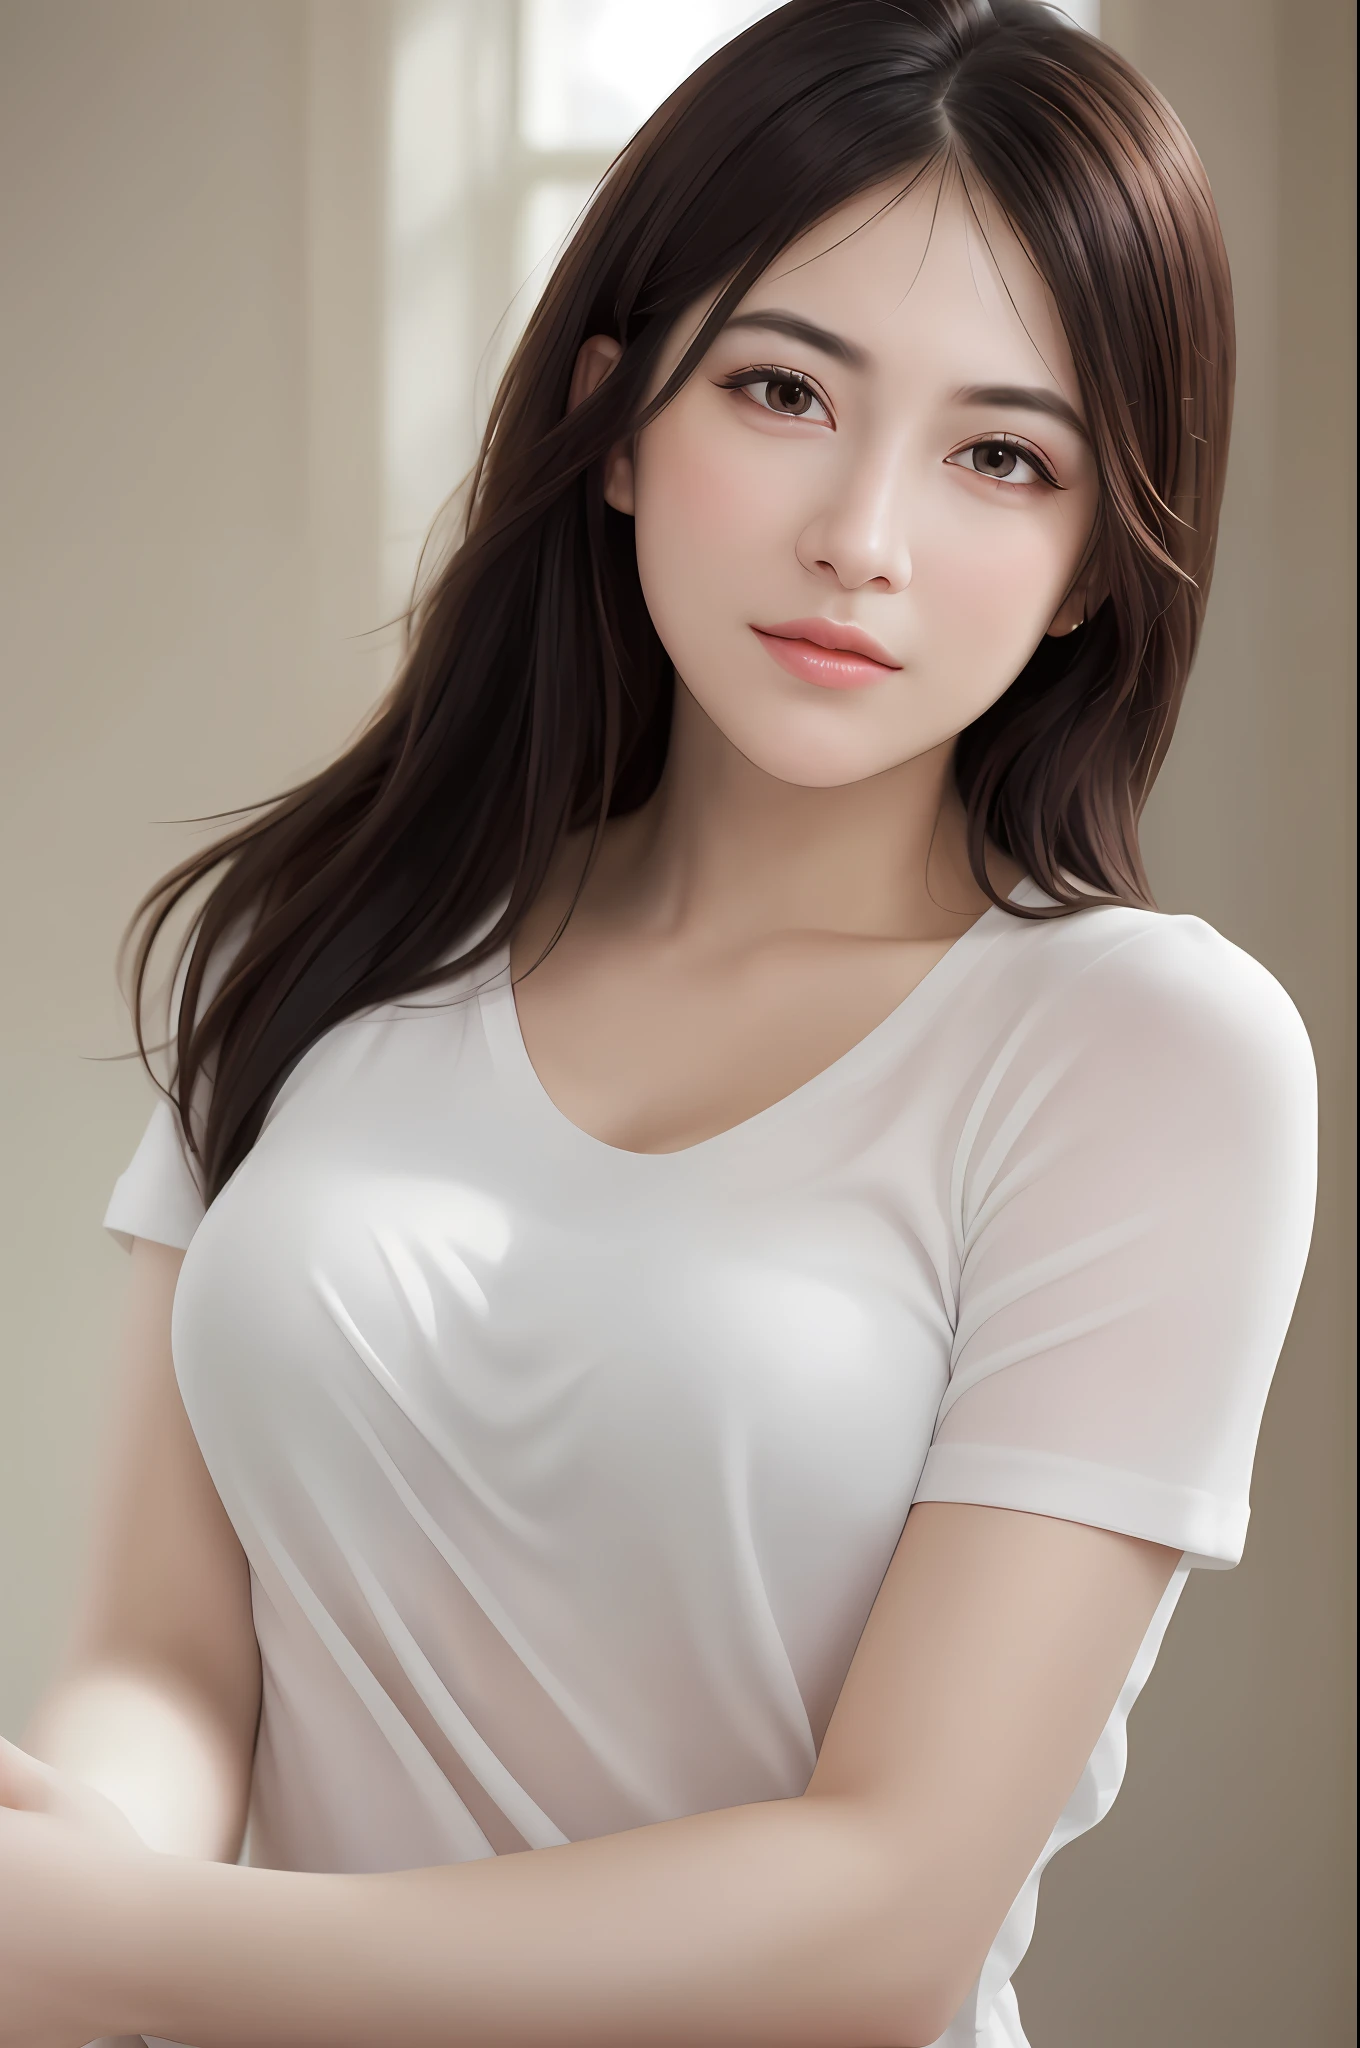 dressed, (photo realistic:1.4), (hyper realistic:1.4), (realistic:1.3),
(smoother lighting:1.05), (increase cinematic lighting quality:0.9), 32K,
1girl,20yo girl, realistic lighting, backlighting, light on face, ray trace, (brightening light:1.2), (Increase quality:1.4),
(best quality real texture skin:1.4), finely detailed eyes, finely detailed face, finely quality eyes,
(joy, blush), (tired and sleepy and satisfied), face closeup, t-shirts,
(Increase body line mood:1.1), (Increase skin texture beauty:1.1)